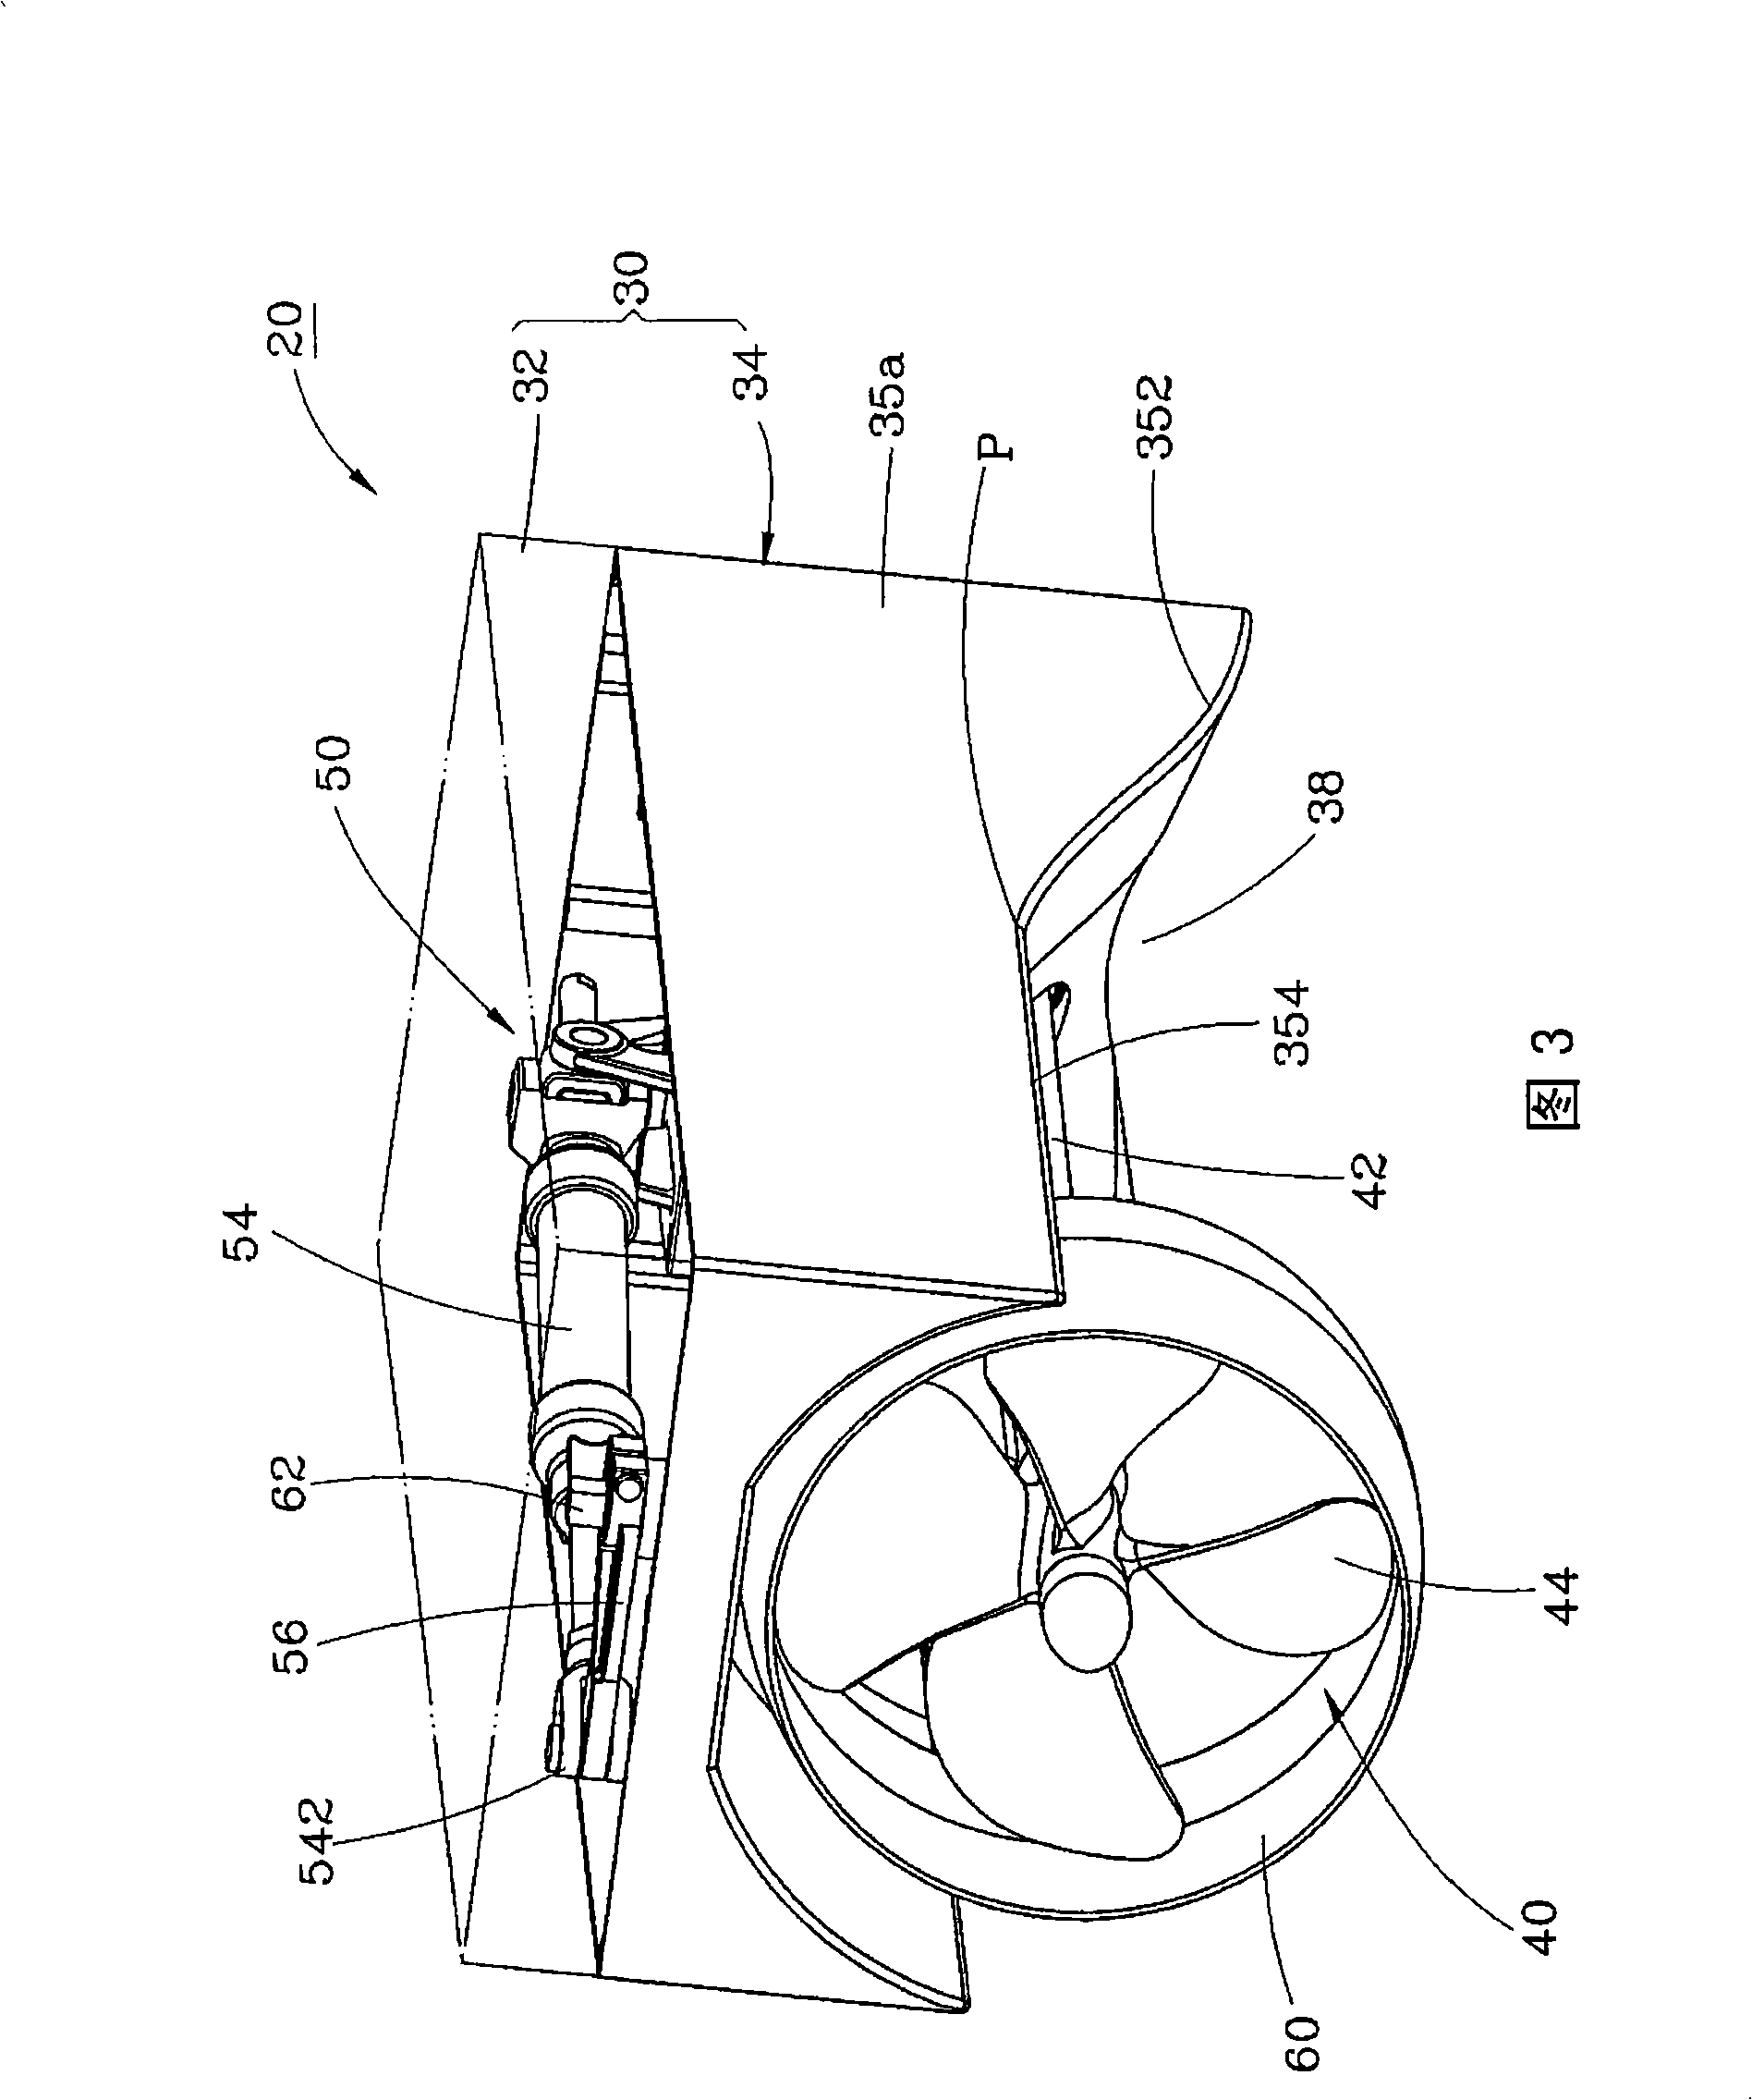 Power type ship propelling system